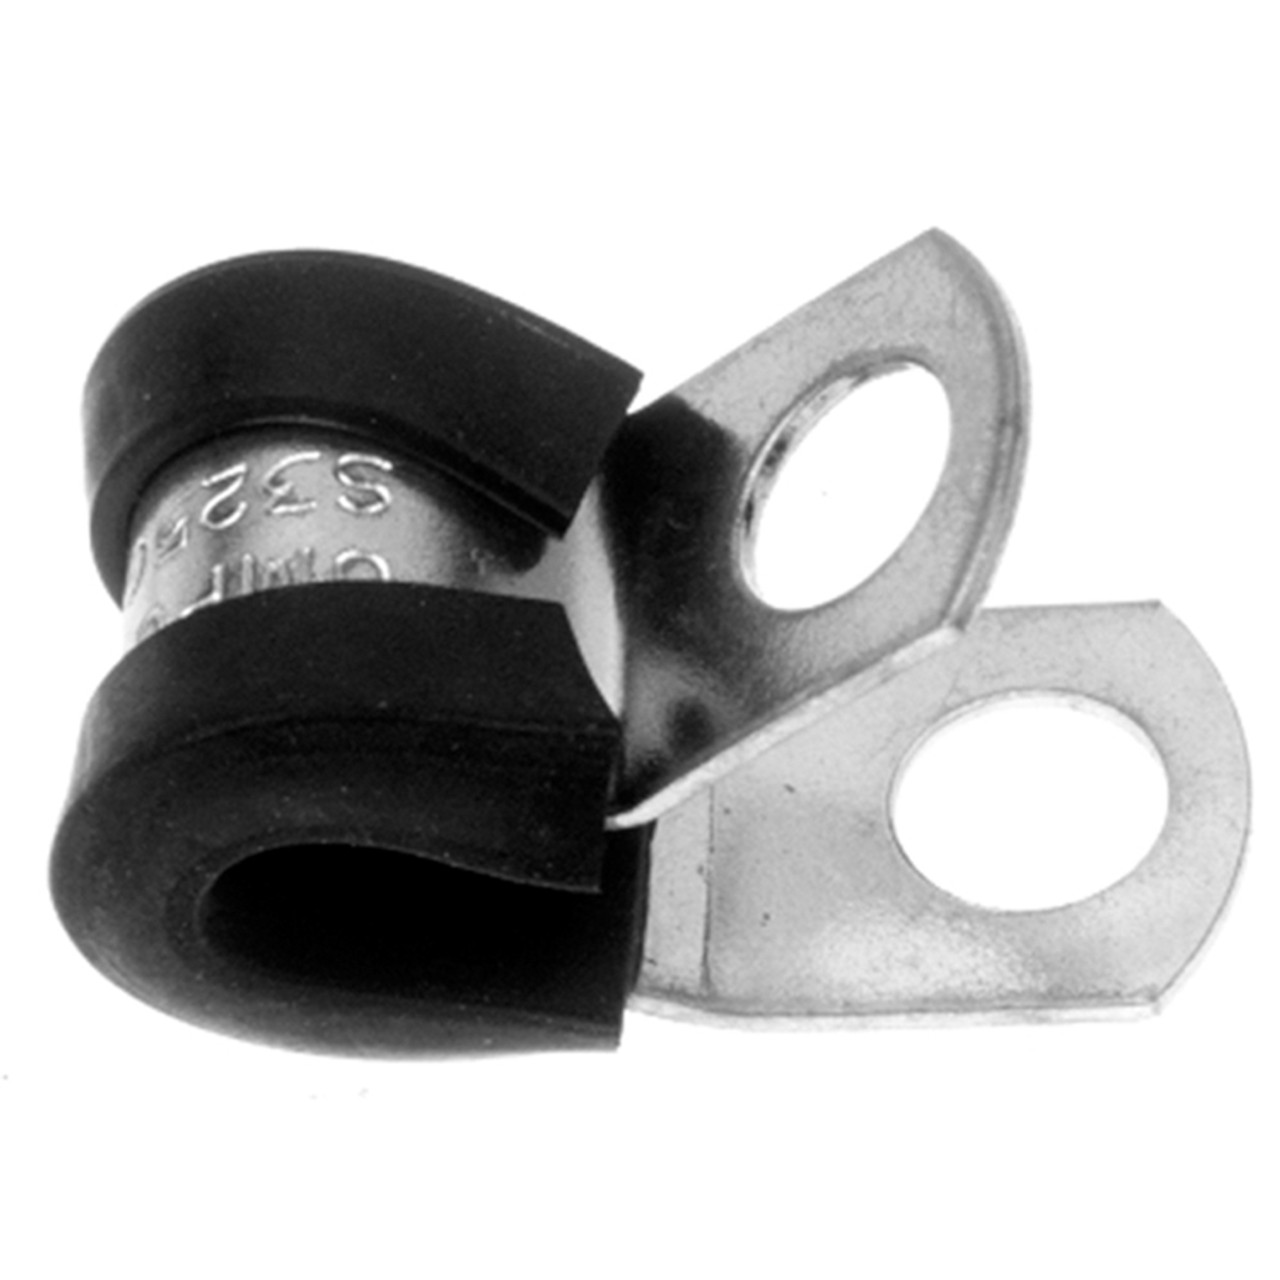 1-1/2" I.D. Plated Steel - Rubber Cushioned Tube Strap - 1/4" Bolt Hole  G6N-24